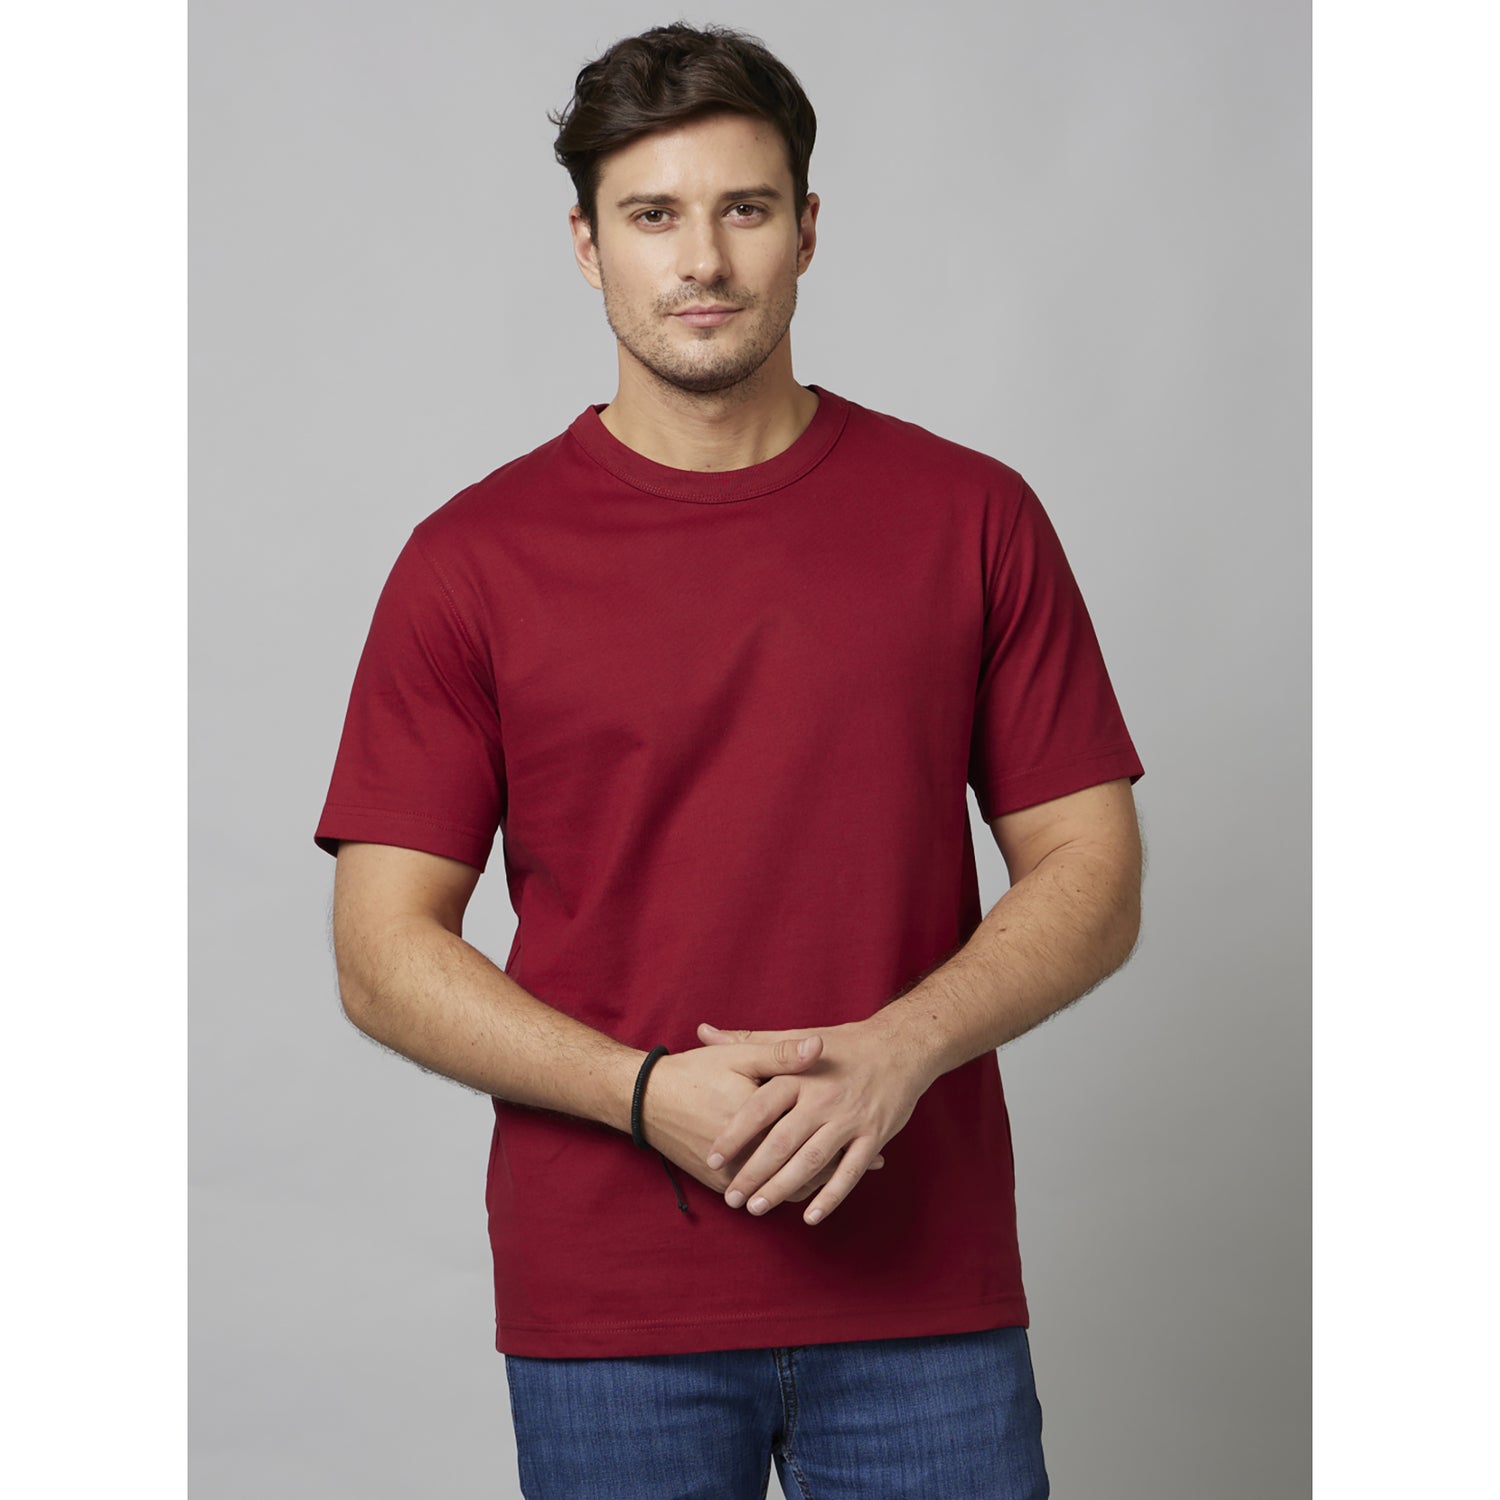 Green Solid Half Sleeve Cotton T-Shirts (TEBOX)